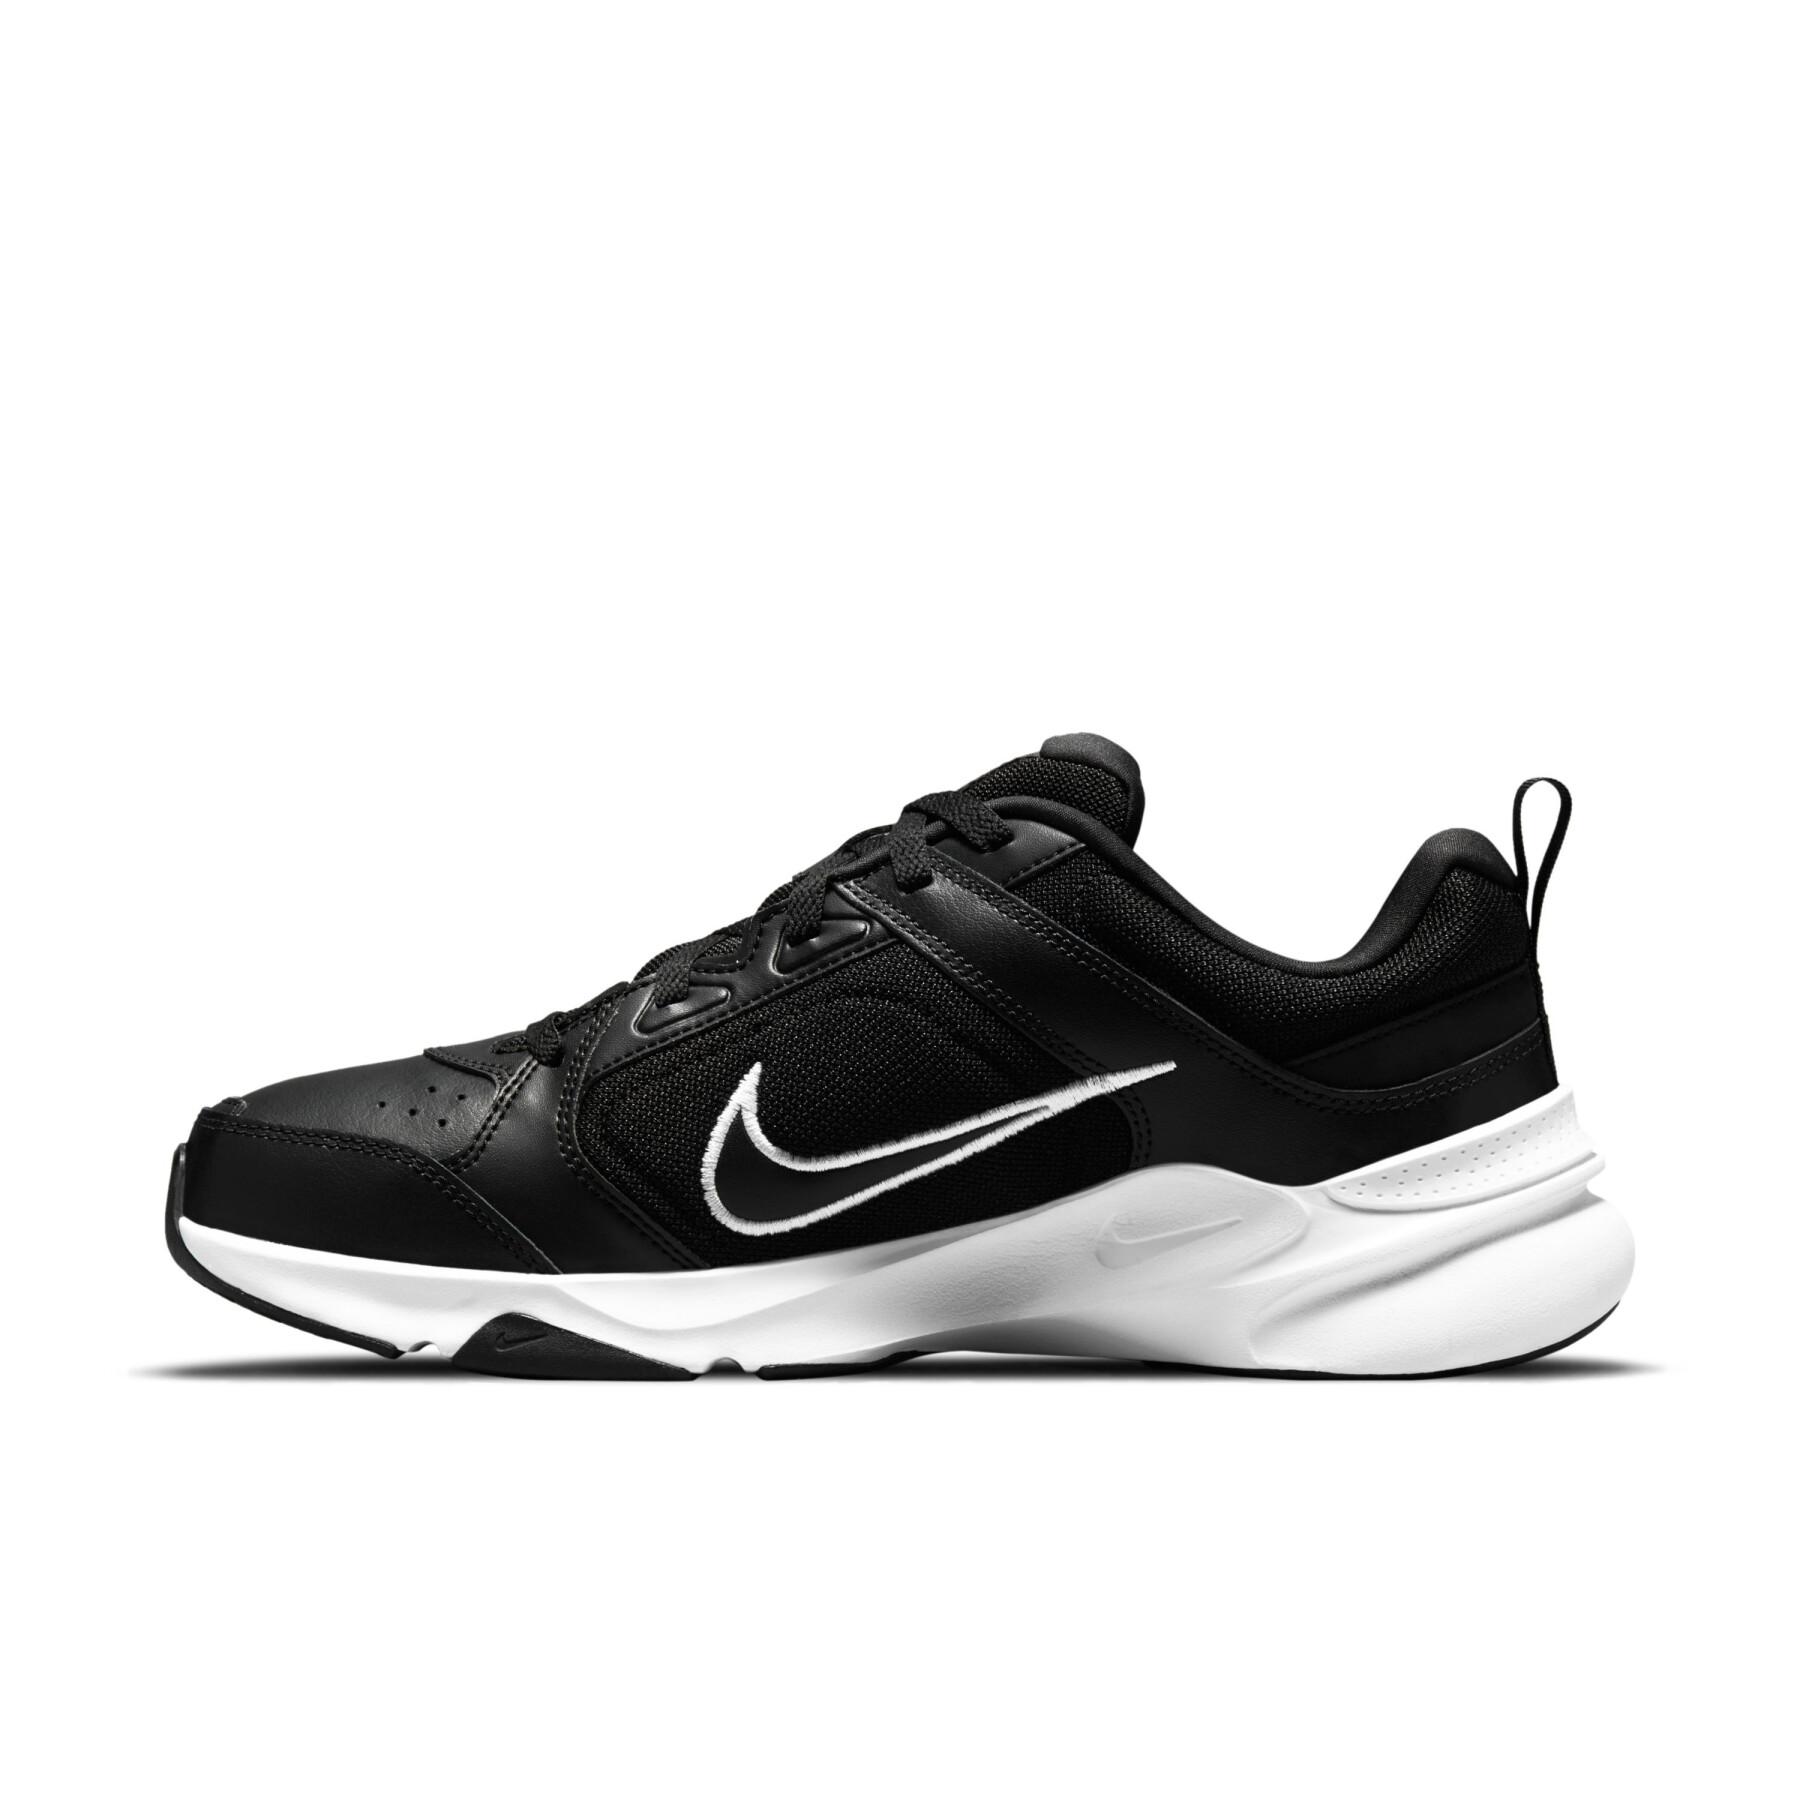 Chaussures de cross training Nike Defy All Day